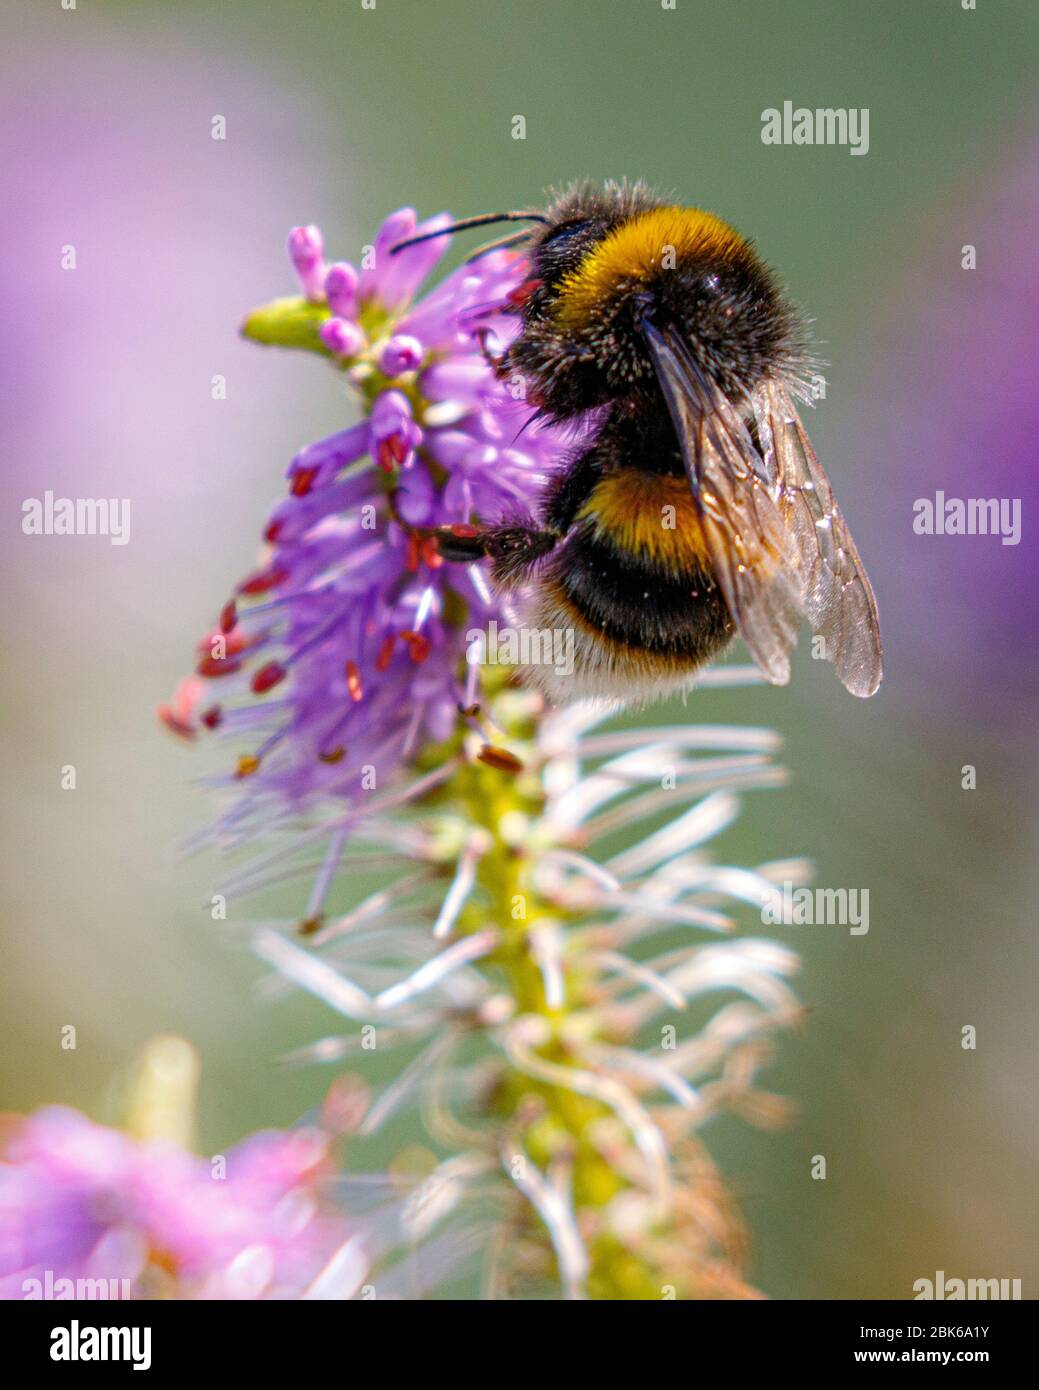 bumble bee on flower spike Stock Photo